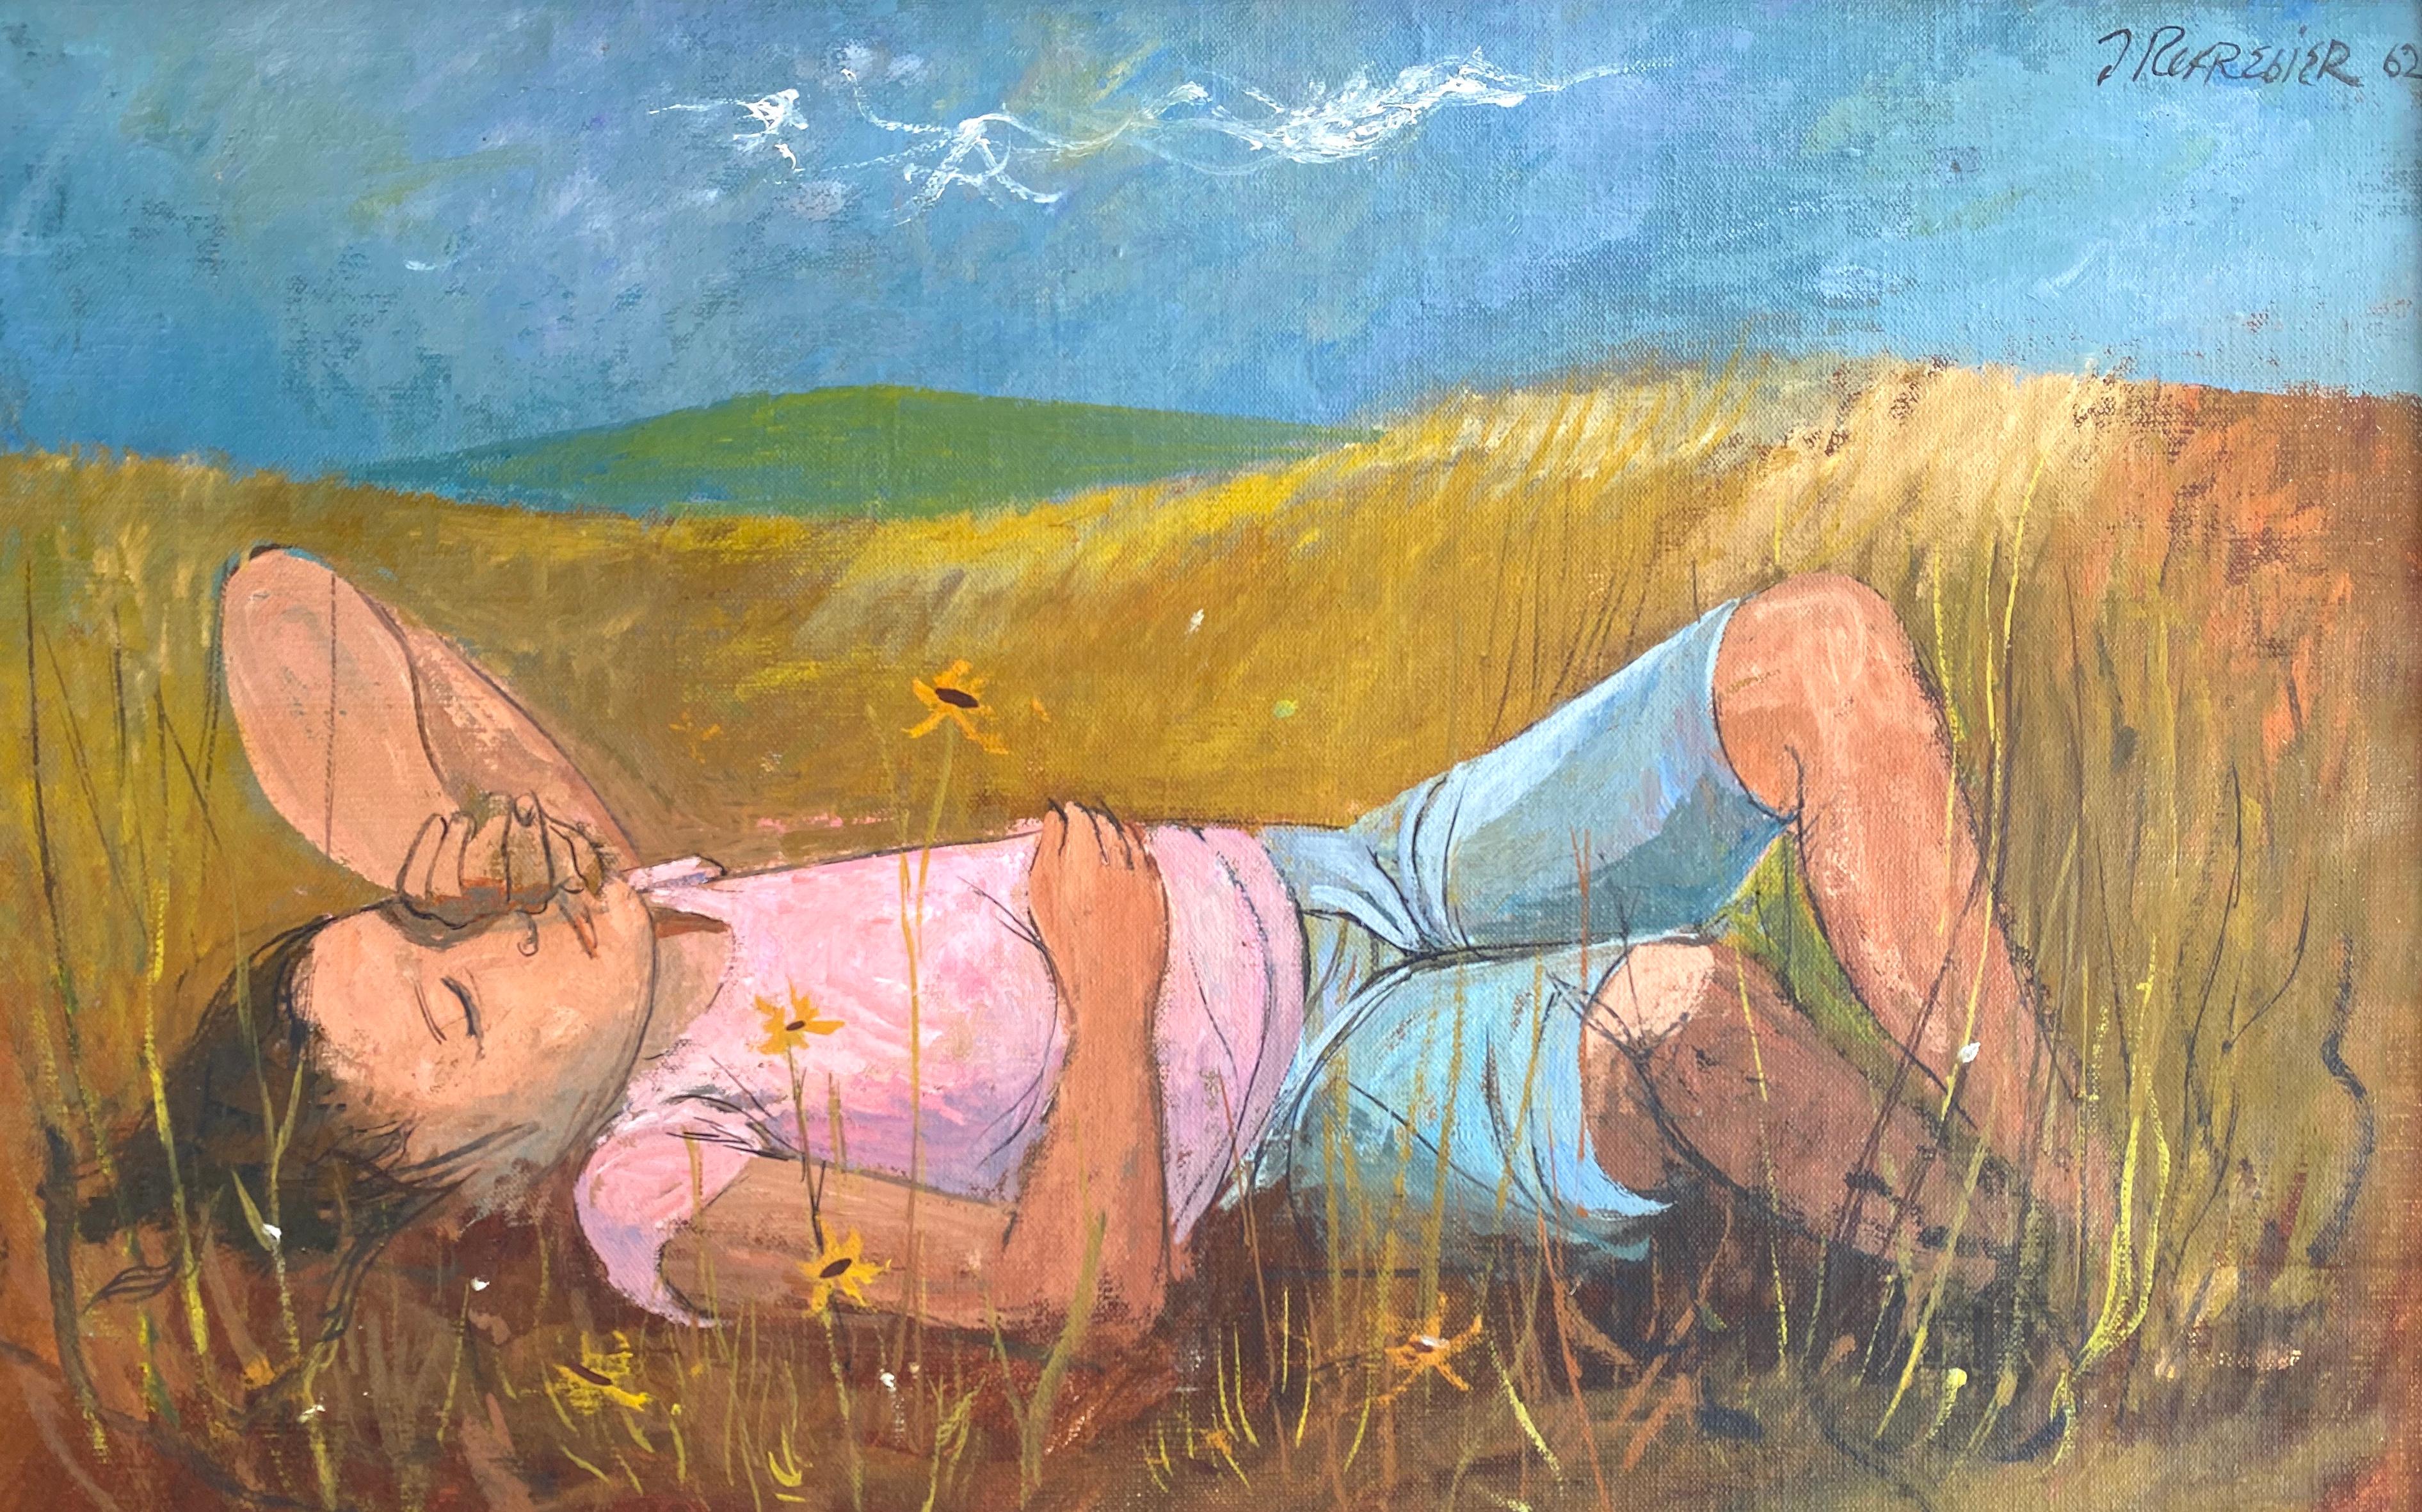 “Girl in the Grass”